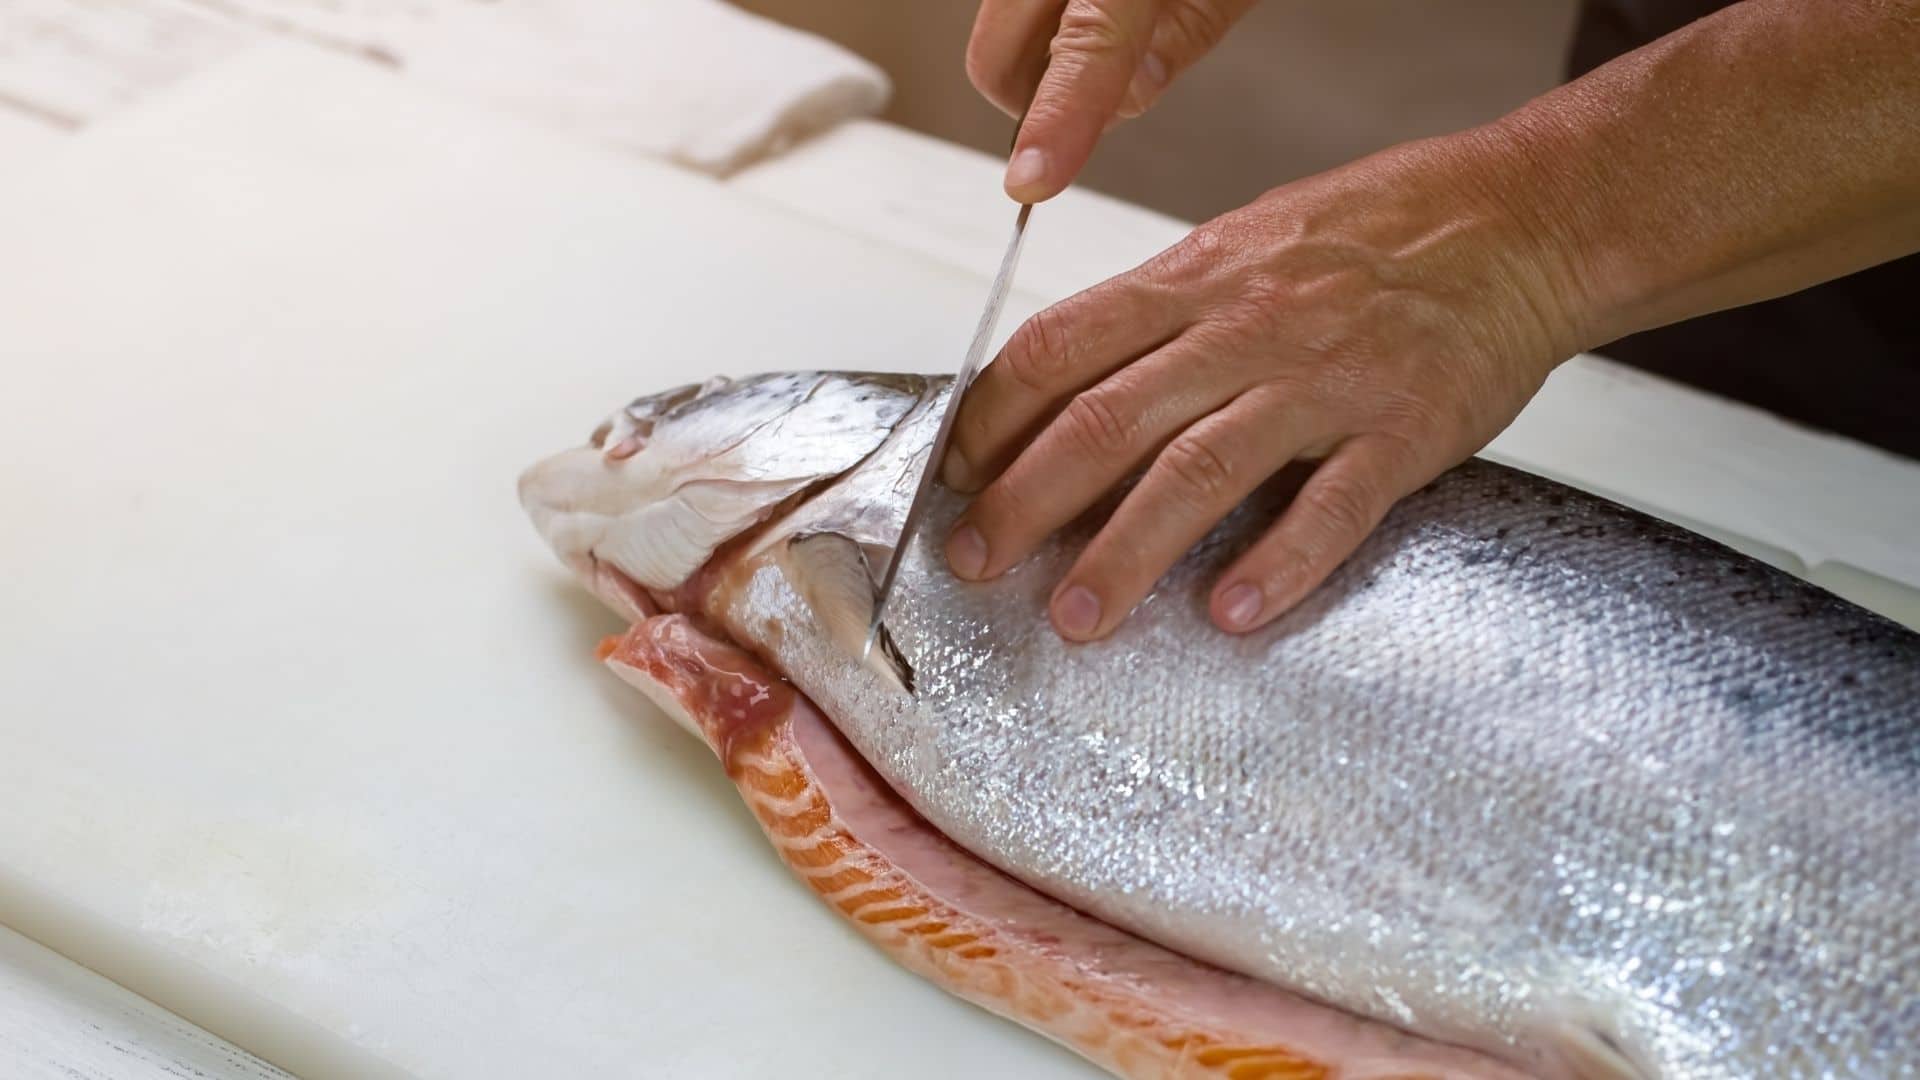 Choosing The Perfect Knife To Clean And Cut Fish